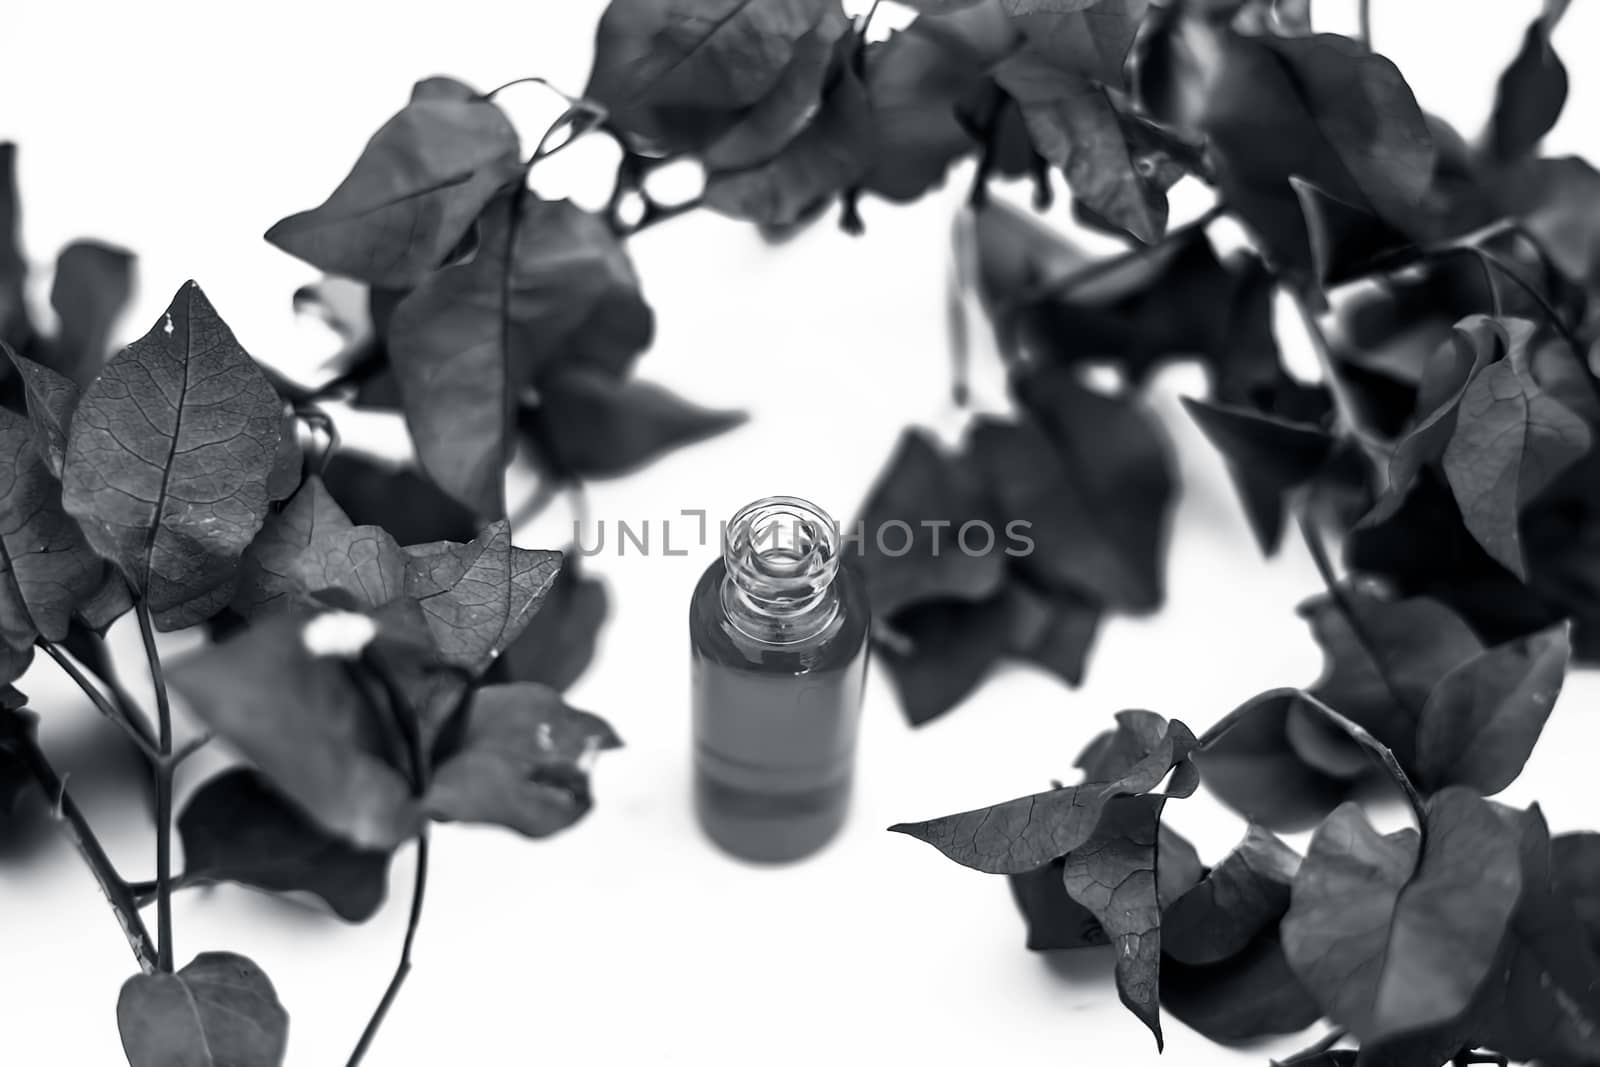 Close up shot of essence of Bougainvillea flowers in a small transparent glass bottle isolated on white with raw flowers and leaves.